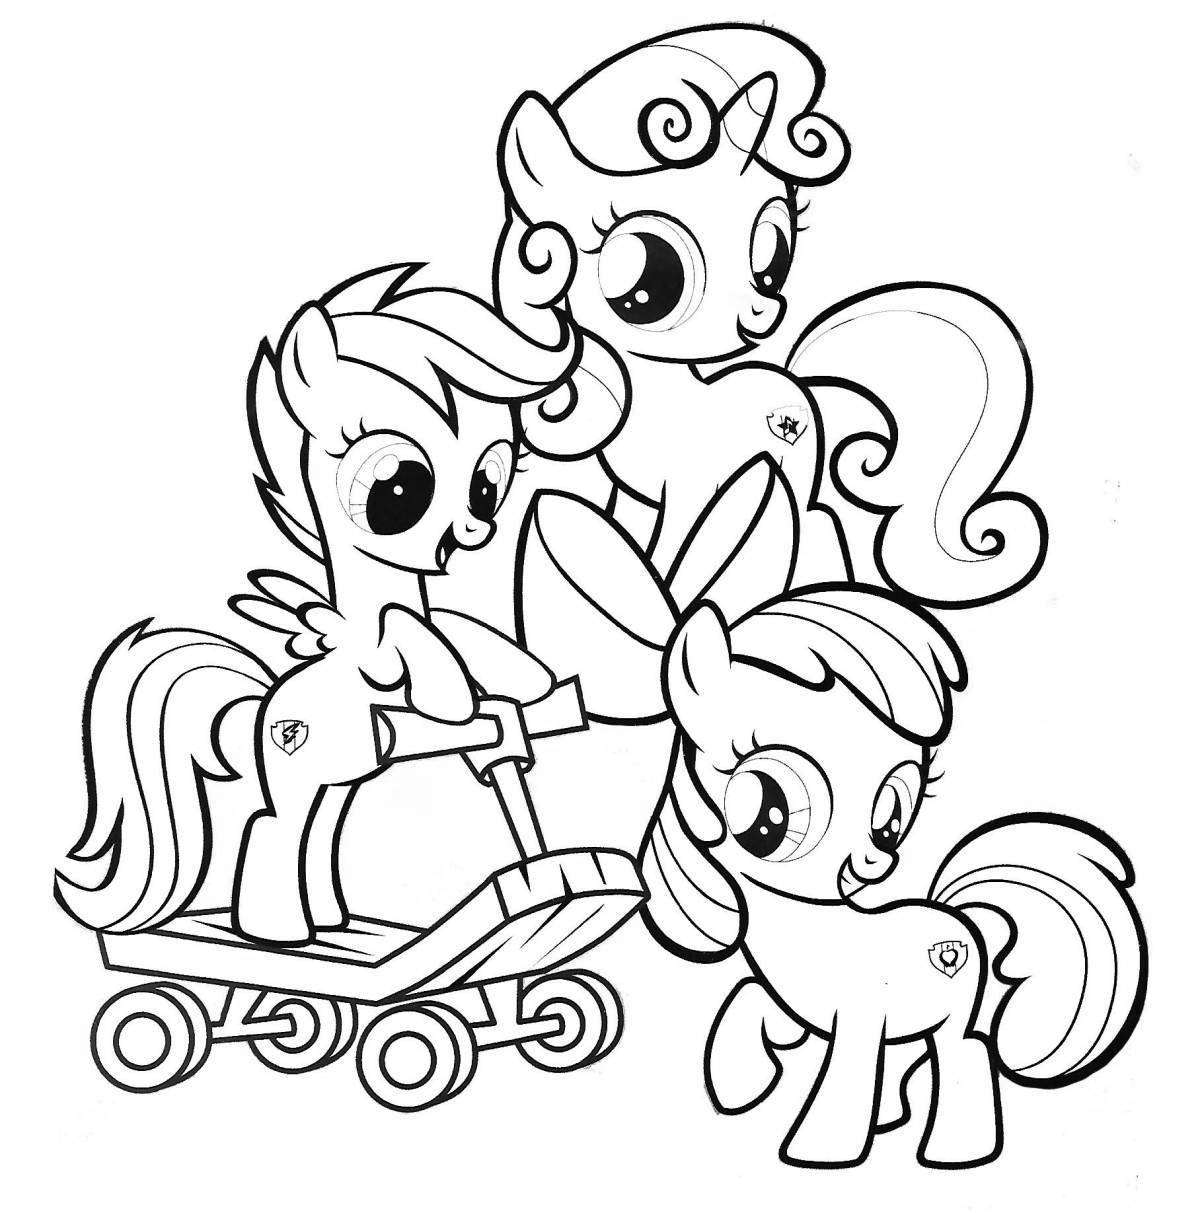 May little pony coloring page #3